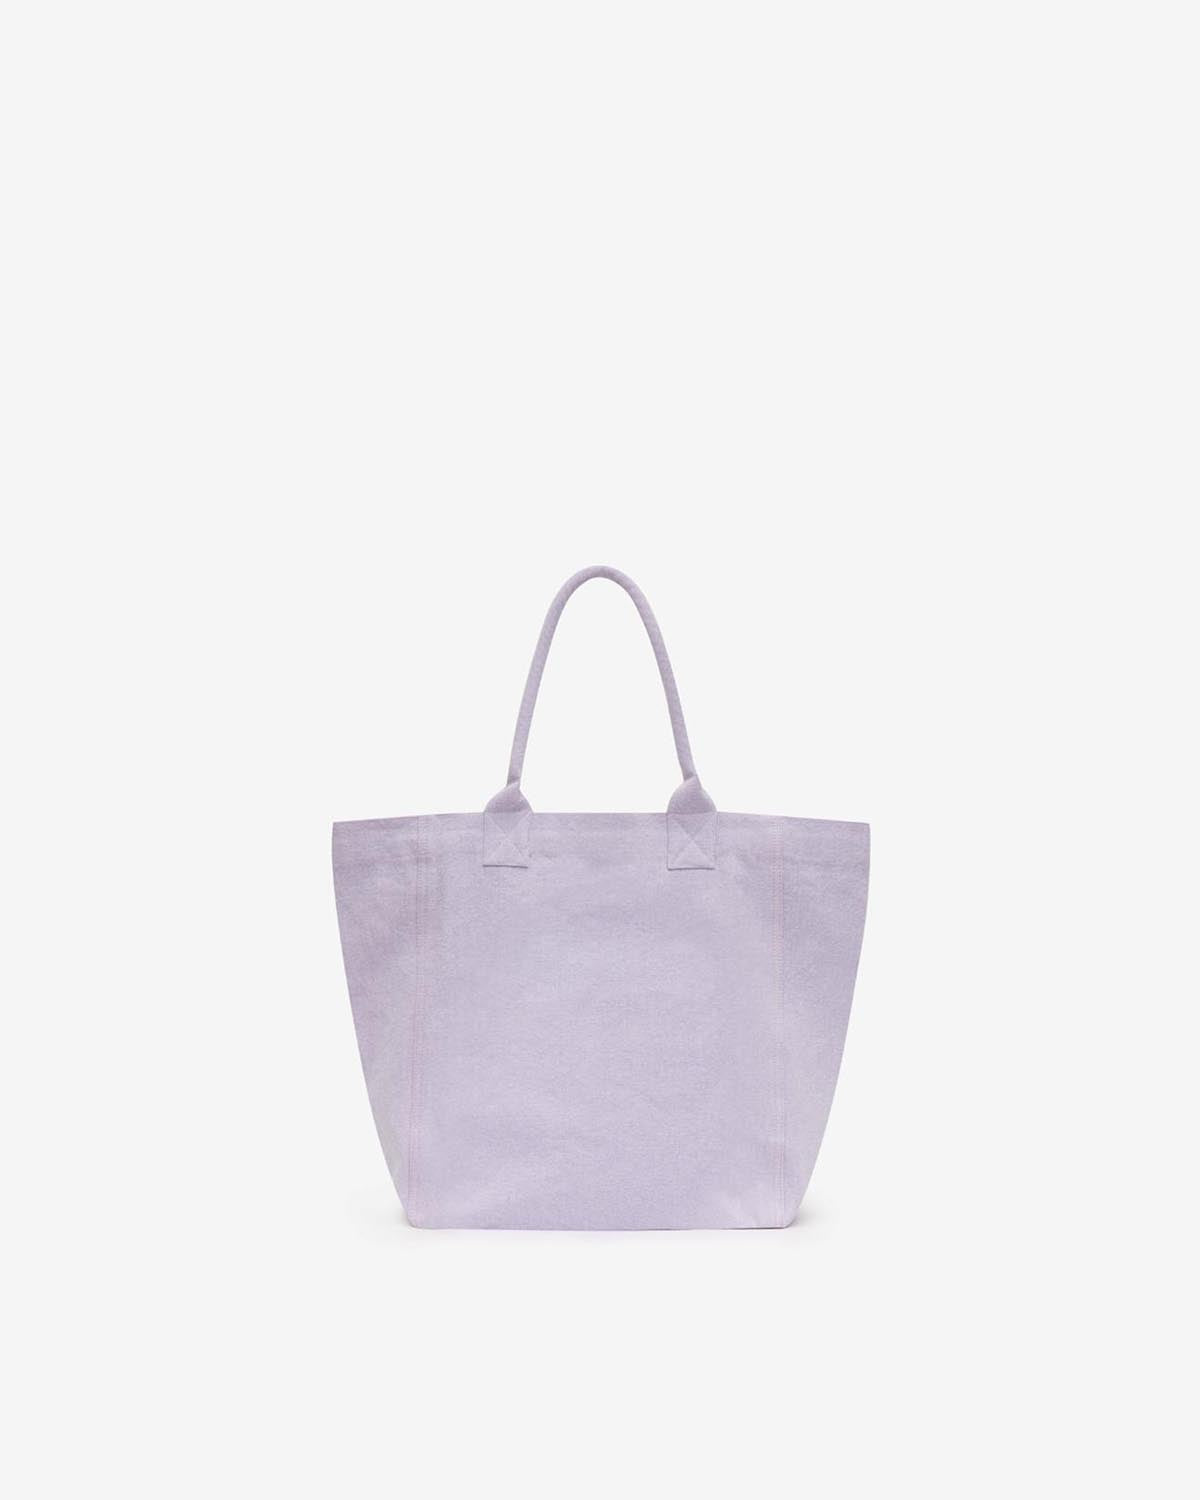 Tasche yenky small Woman Lilac 2